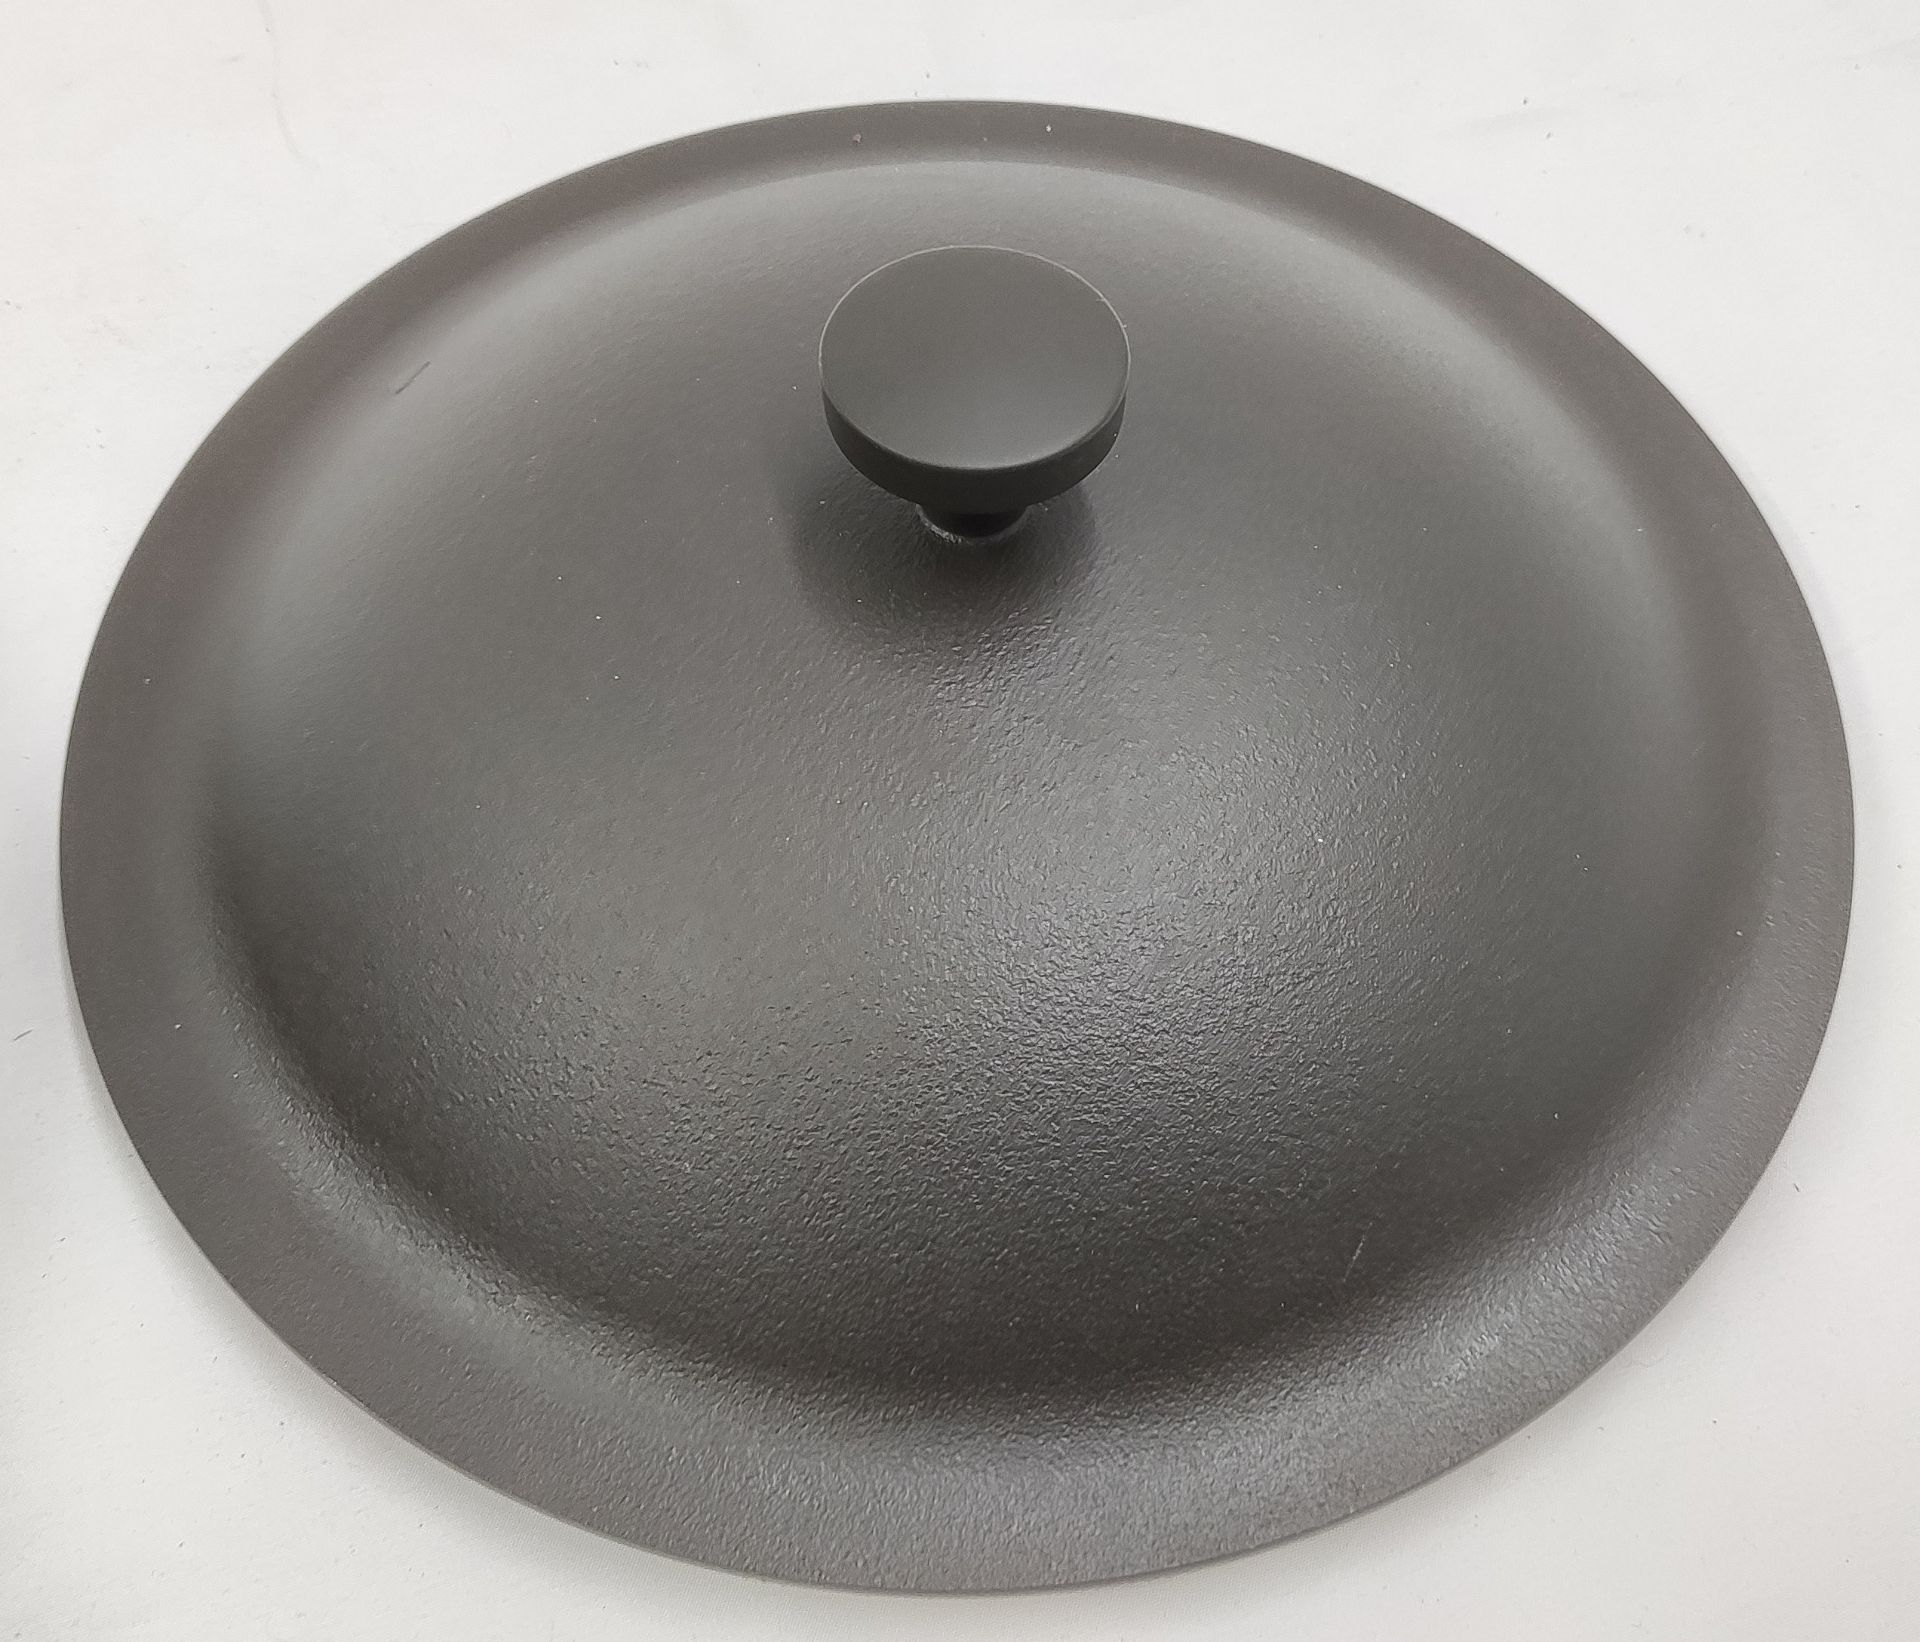 1 x OUR PLACE Our Place Cast Iron Always Pan In Charcoal - RRP £135 - Ref: 7260391/HOC165/HC6 - - Image 13 of 17